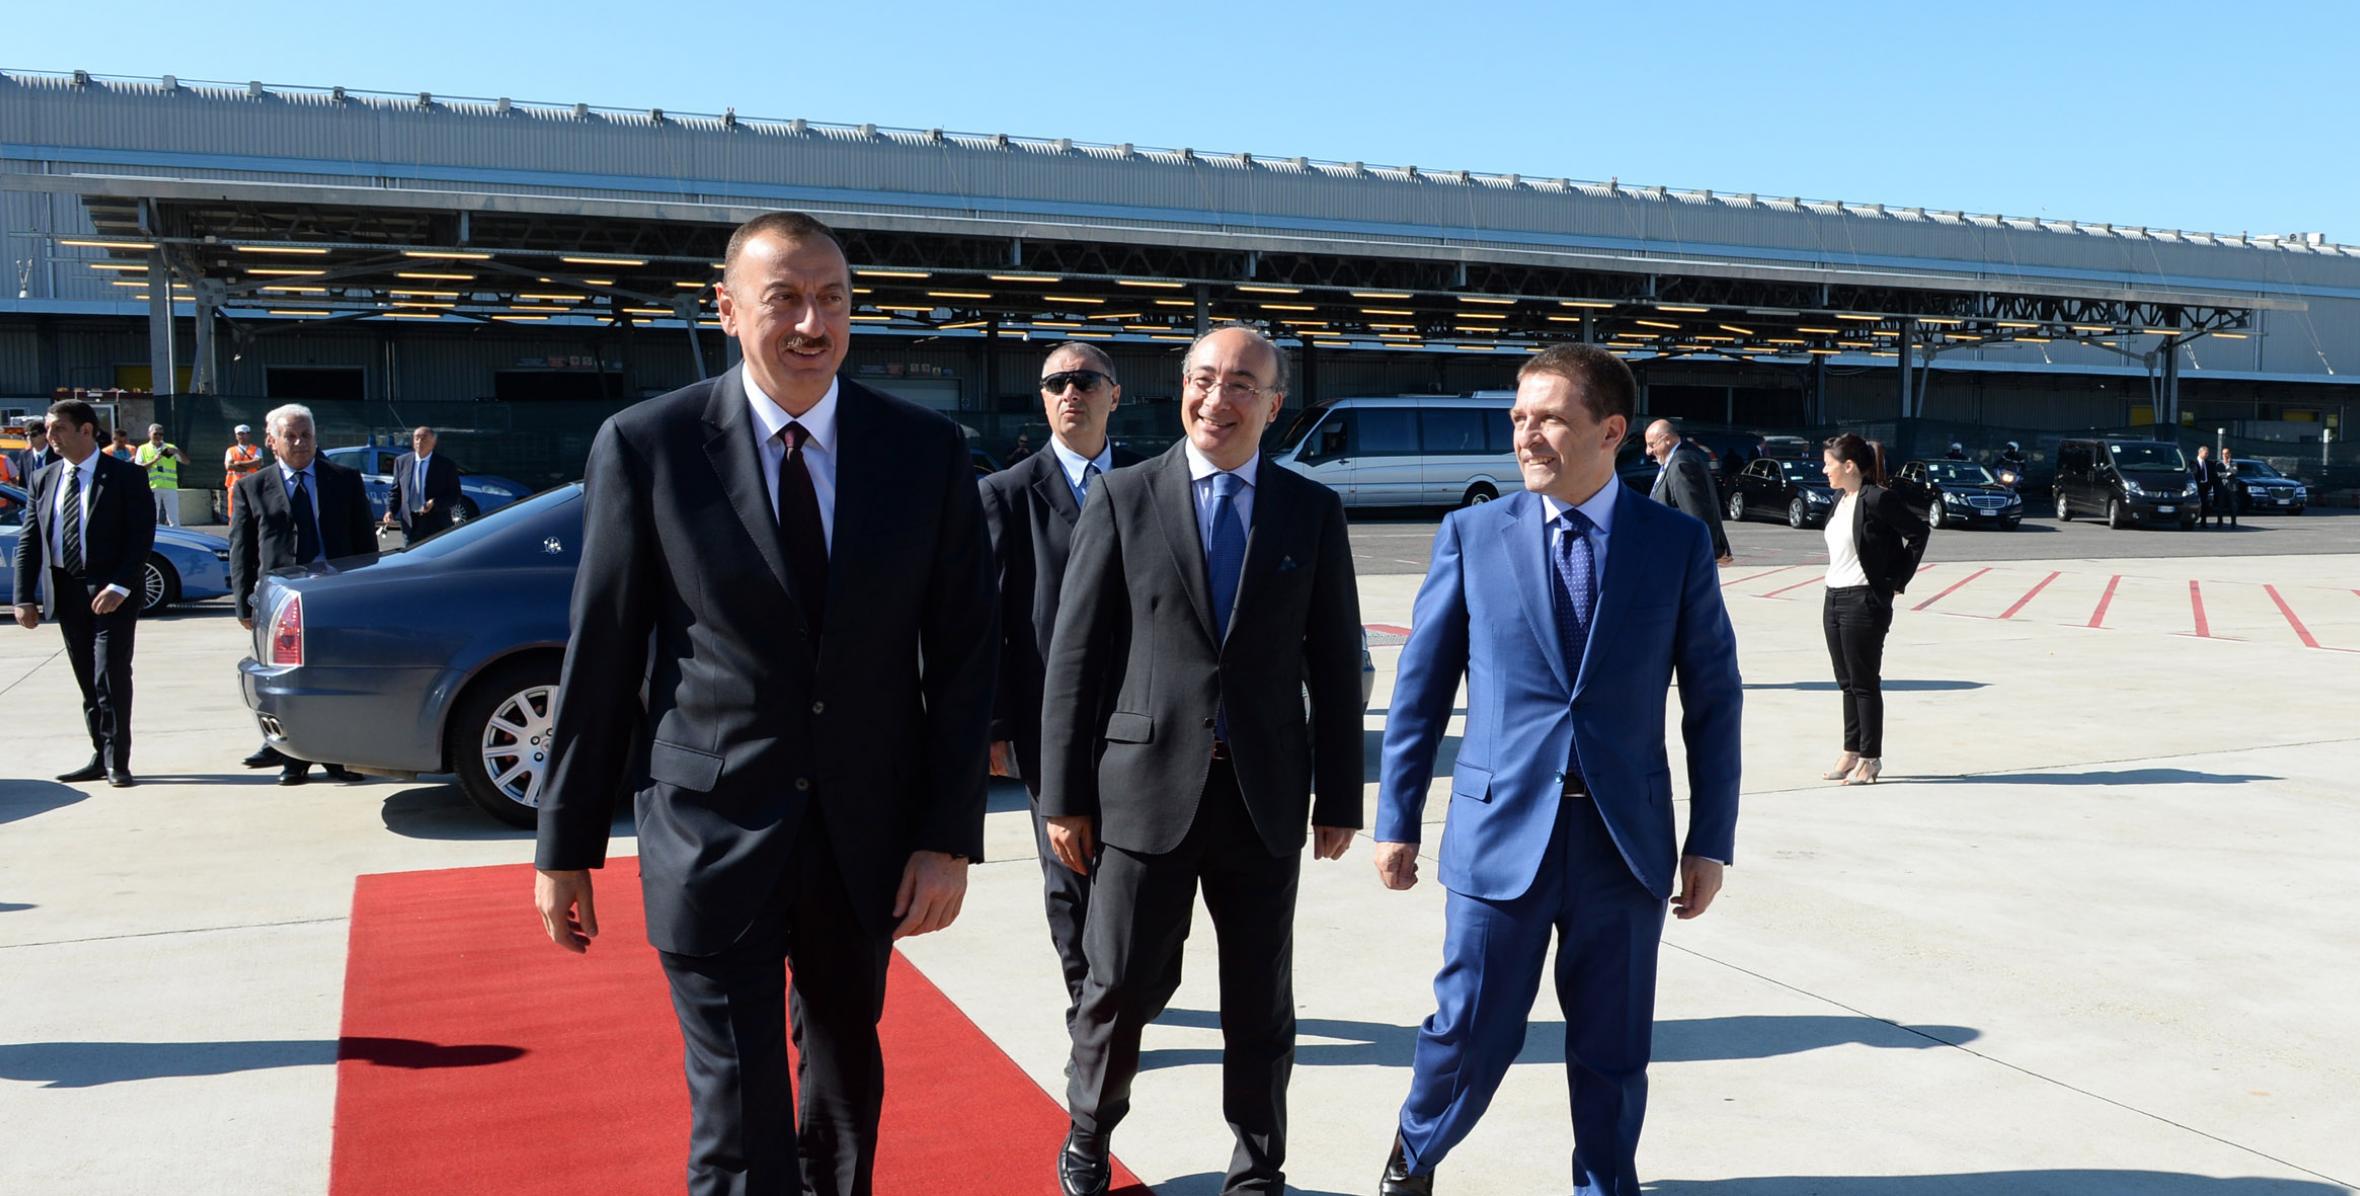 Ilham Aliyev’s official visit to Italy ended